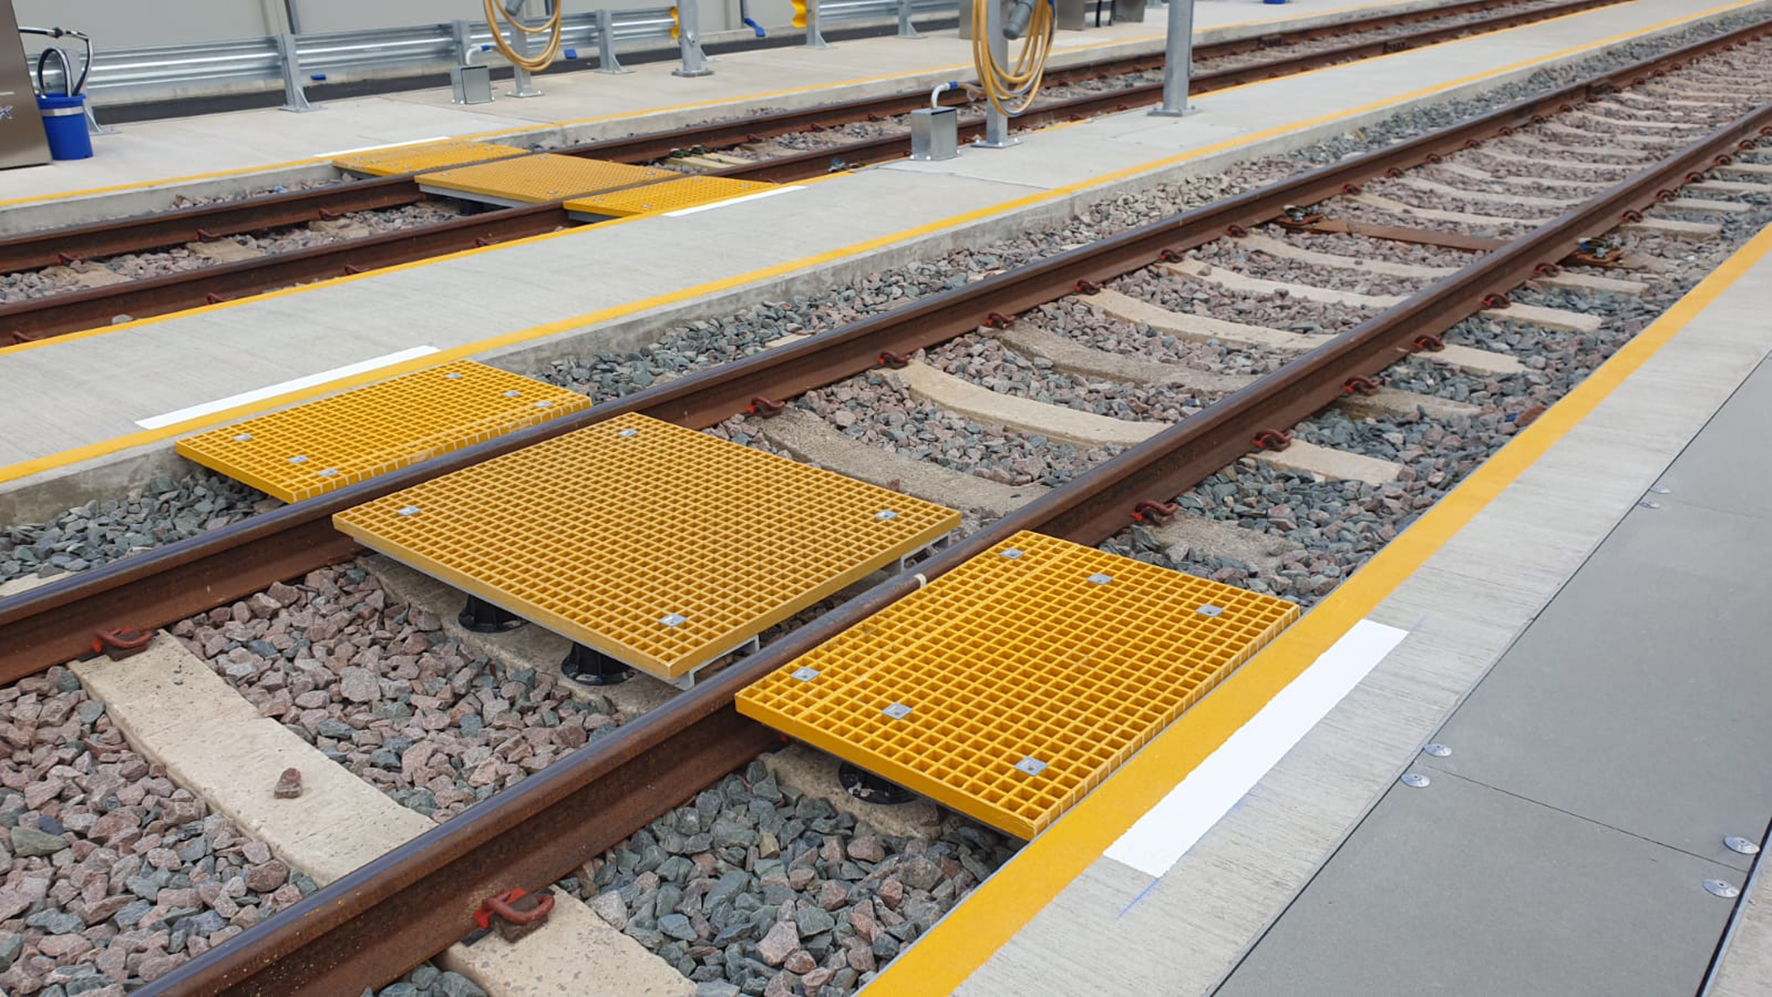 A GRP open mesh walkway comprising yellow mesh panels cut to fit between railway tracks to create a trip-free route from one side of the depot to the other